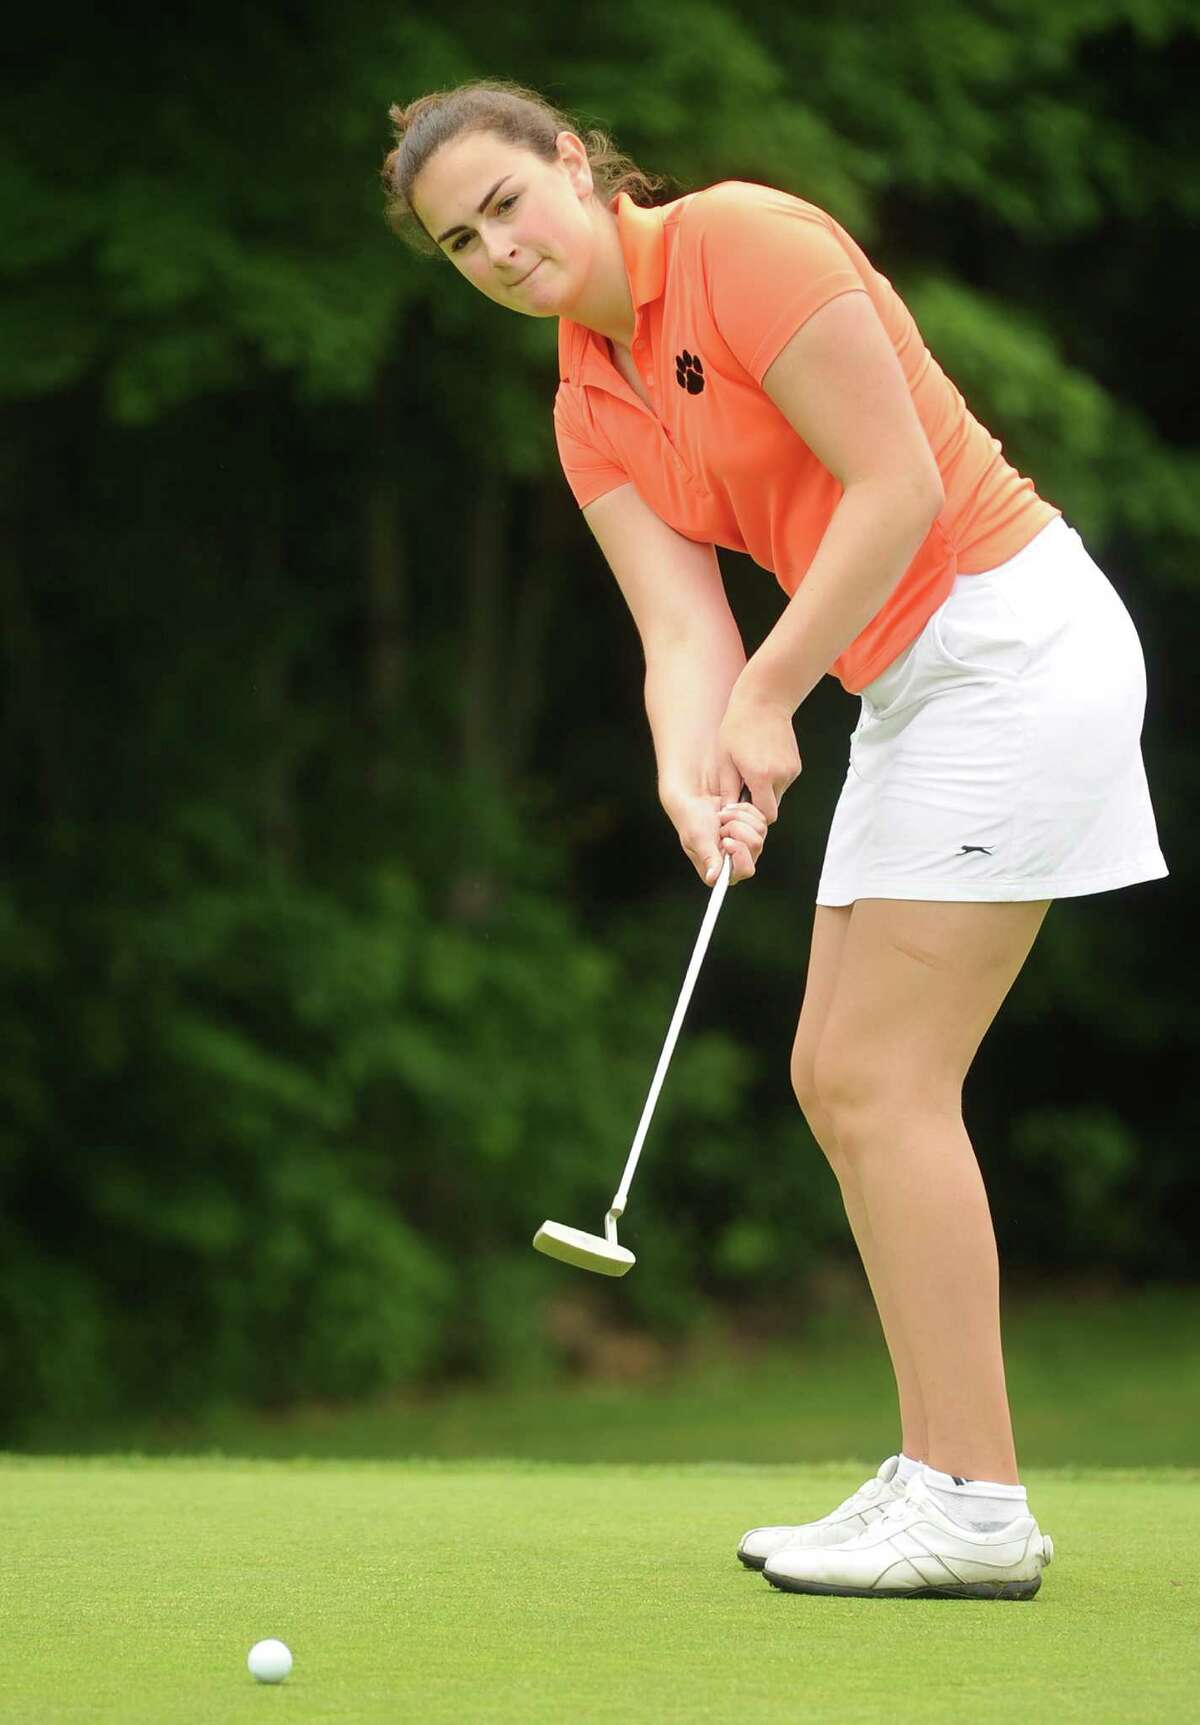 Ridgefield's Gillian Fennell putts on the 7th green during the Girls Golf State Championship at Orange Hills Country Club in Orange, CT on Tuesday, June 9, 2015.